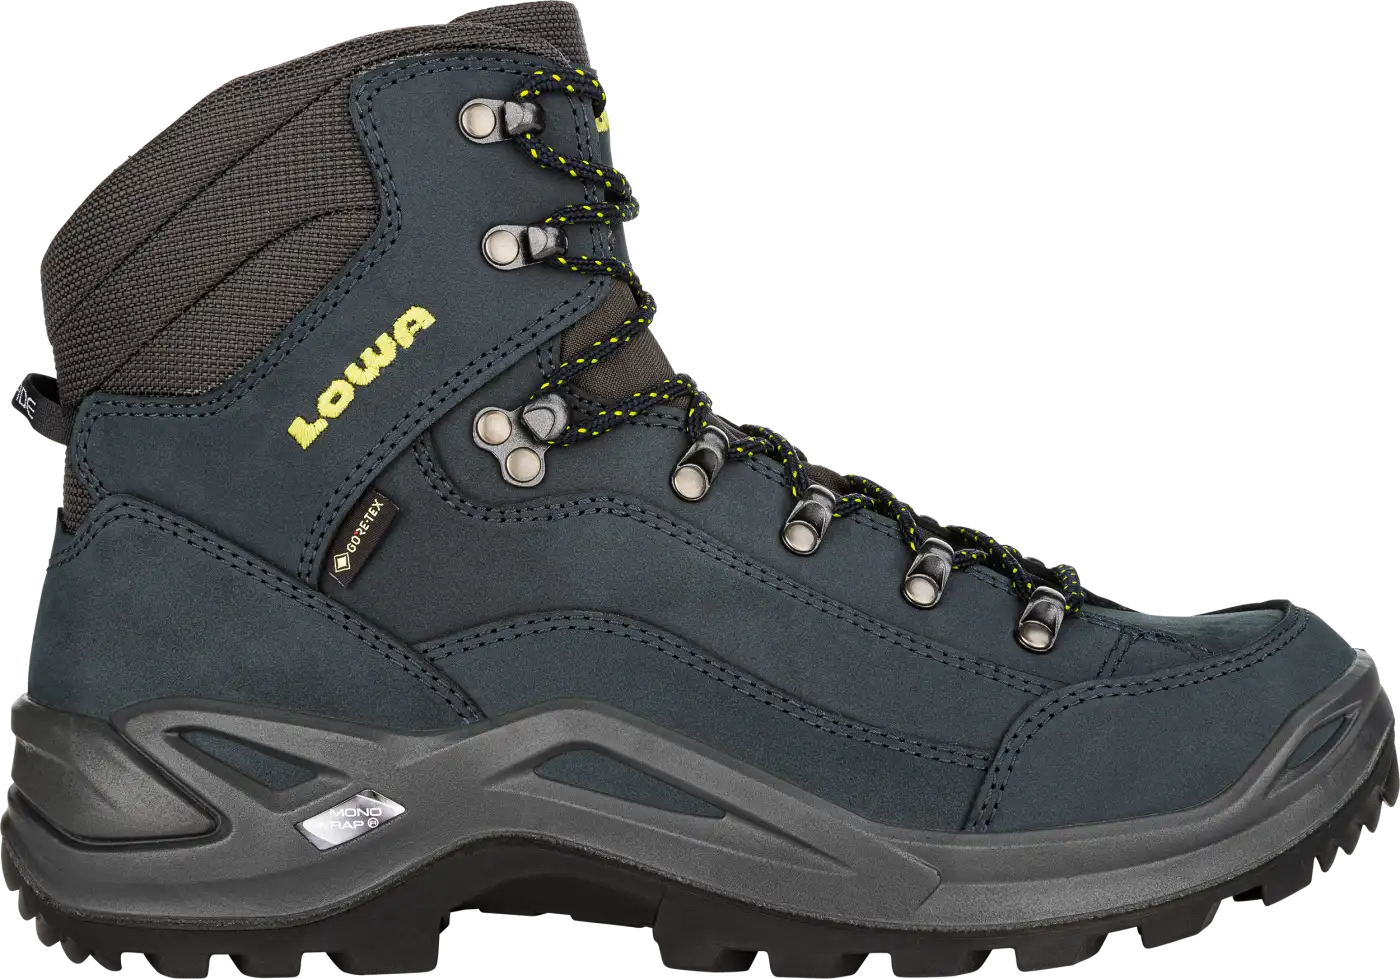 Buty LOWA Renegade GTX mid 310945 6702_renegade gtx mid_2021_outer